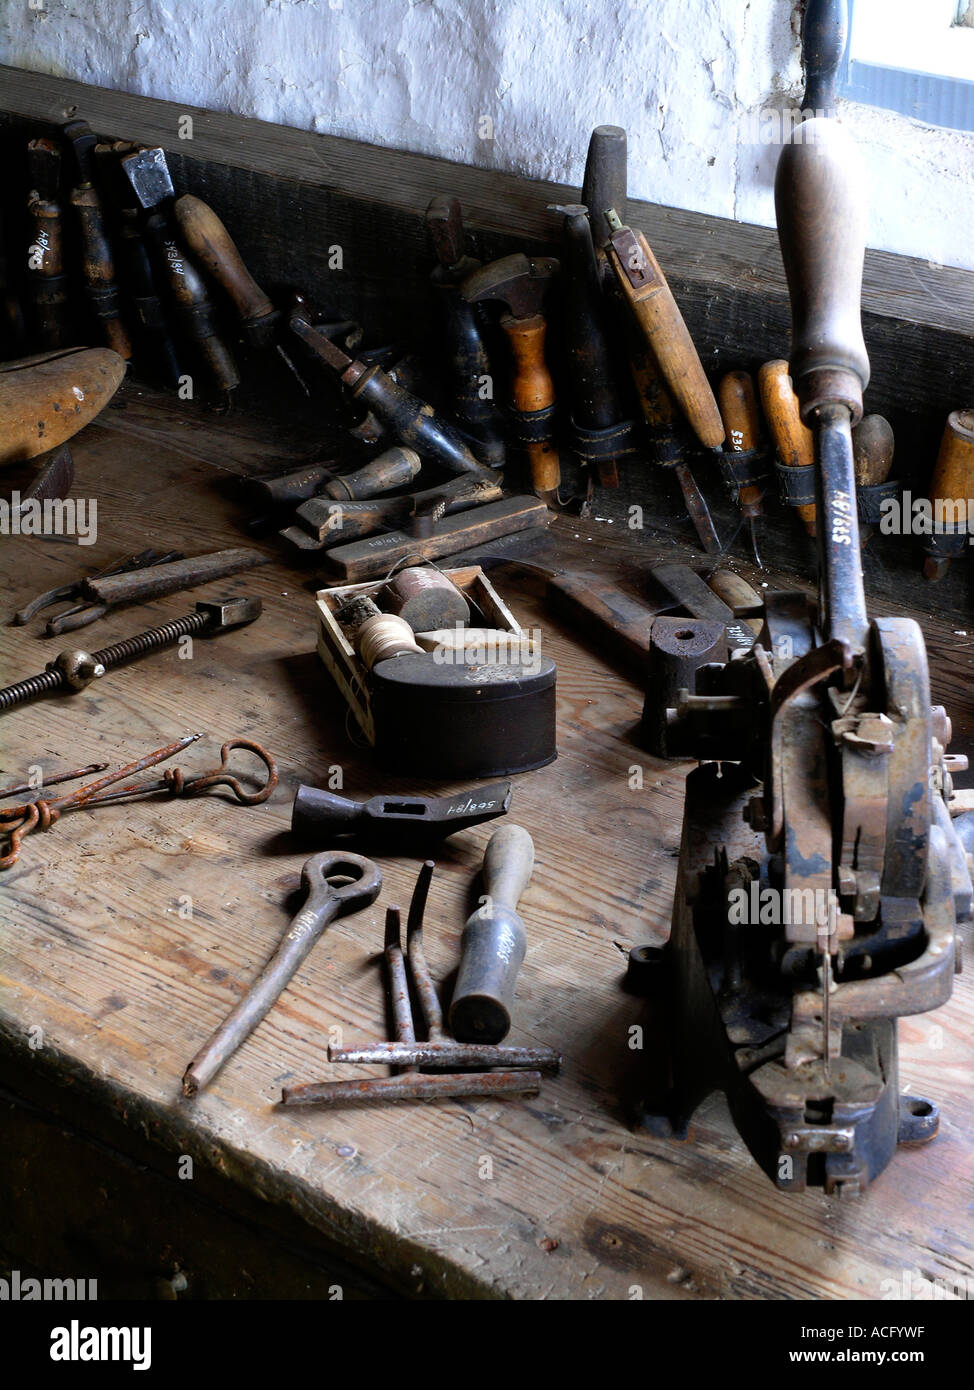 Shoemakers tool bench Stock Photo